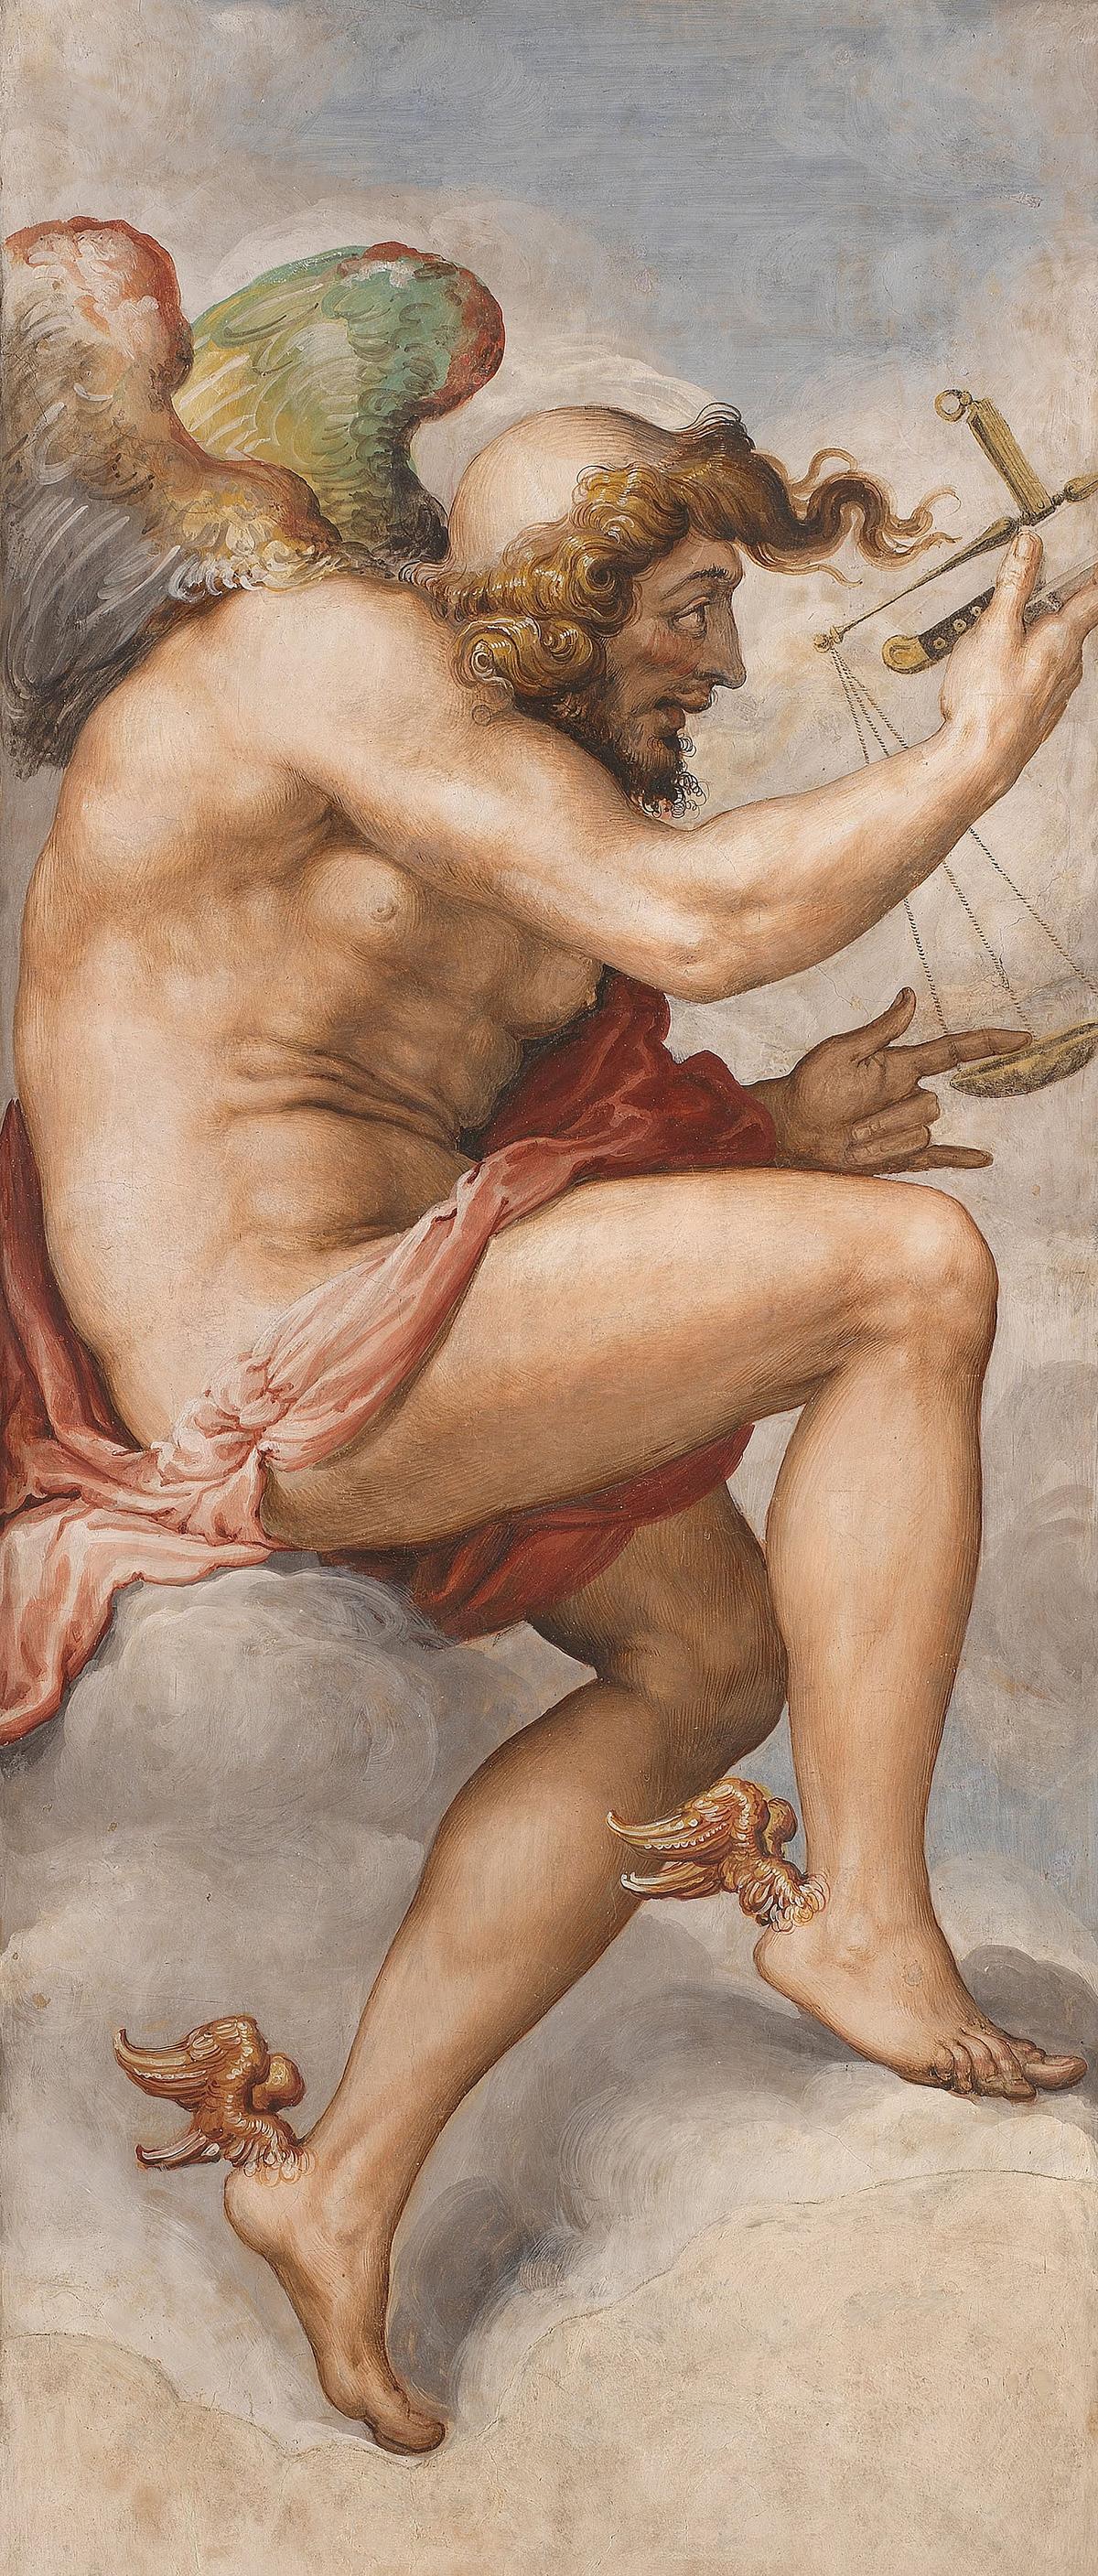 Kairos, the god of time, personified. He has one lock of hair and regulates the weight of time with scales. "Time as Occasion (Kairos)," 1543–1545, by Francesco de' Rossi. Fresco at the Palazzo Vecchio Museum in Florence, Italy. (Public Domain)